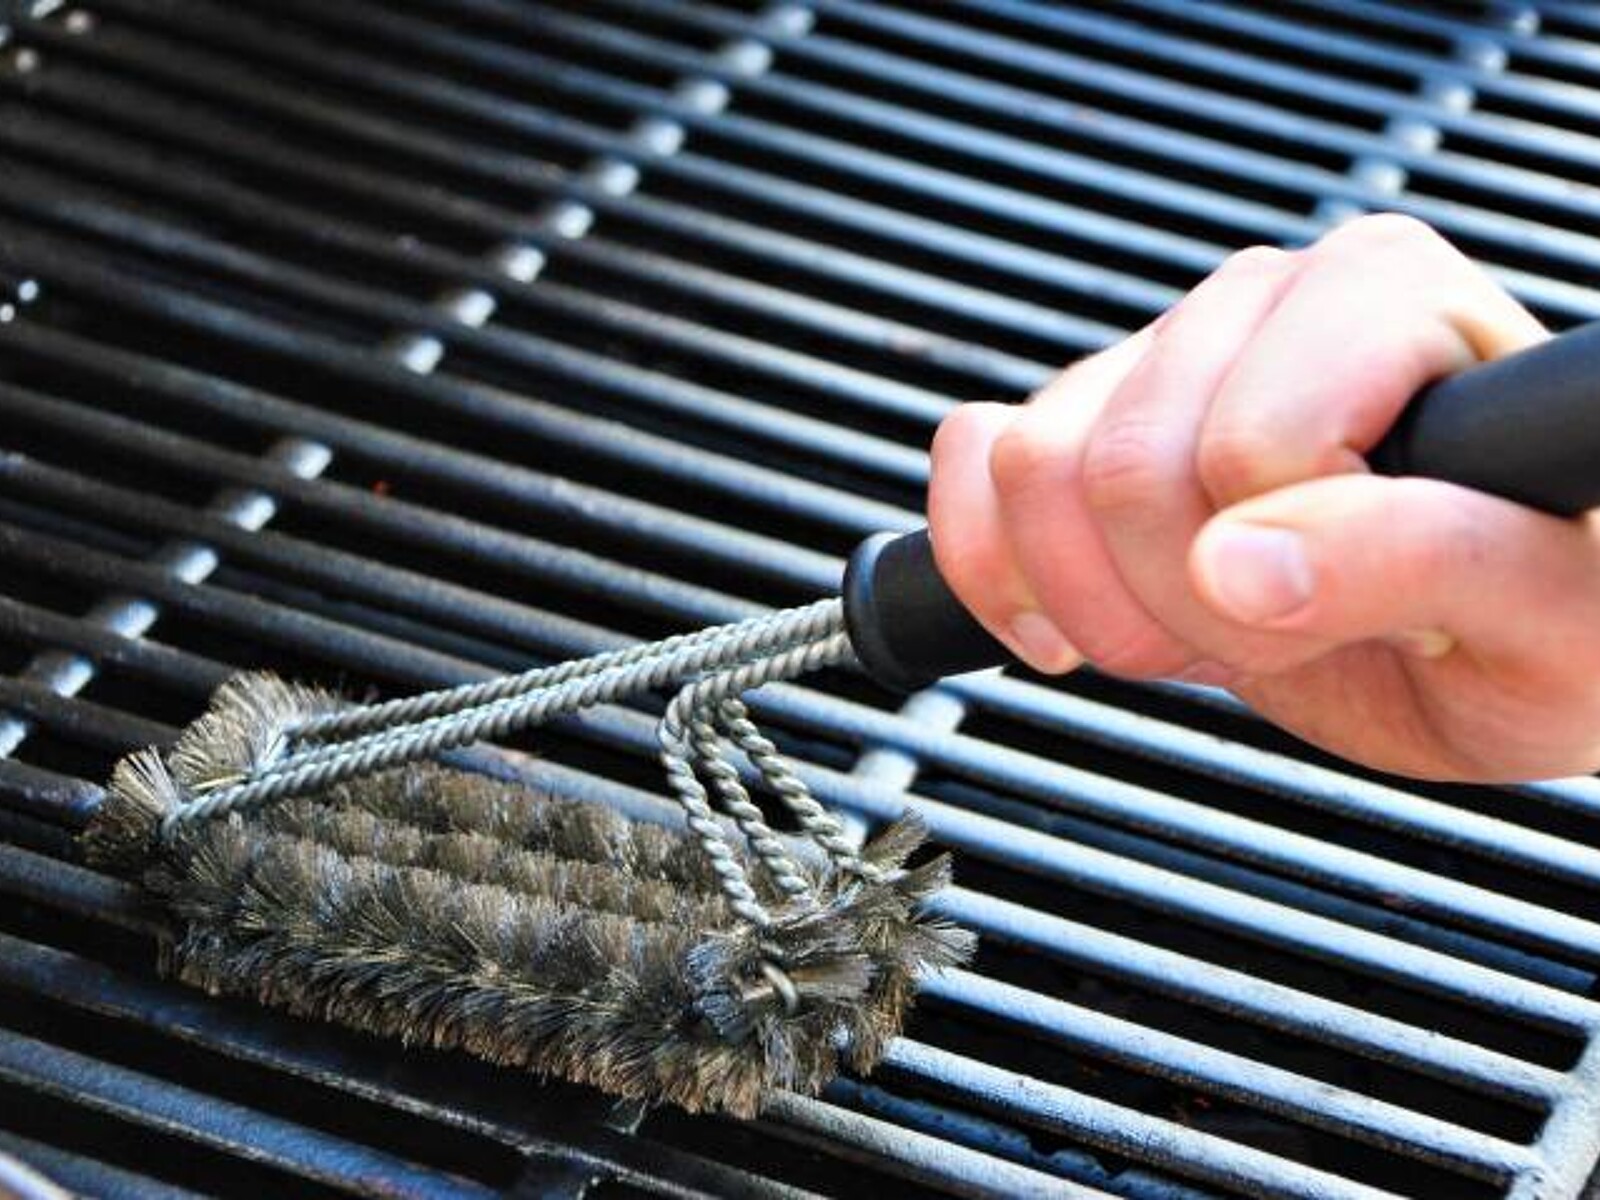 Barbecue Grill Steam Cleaning Barbeque Grill Brush for Charcoal